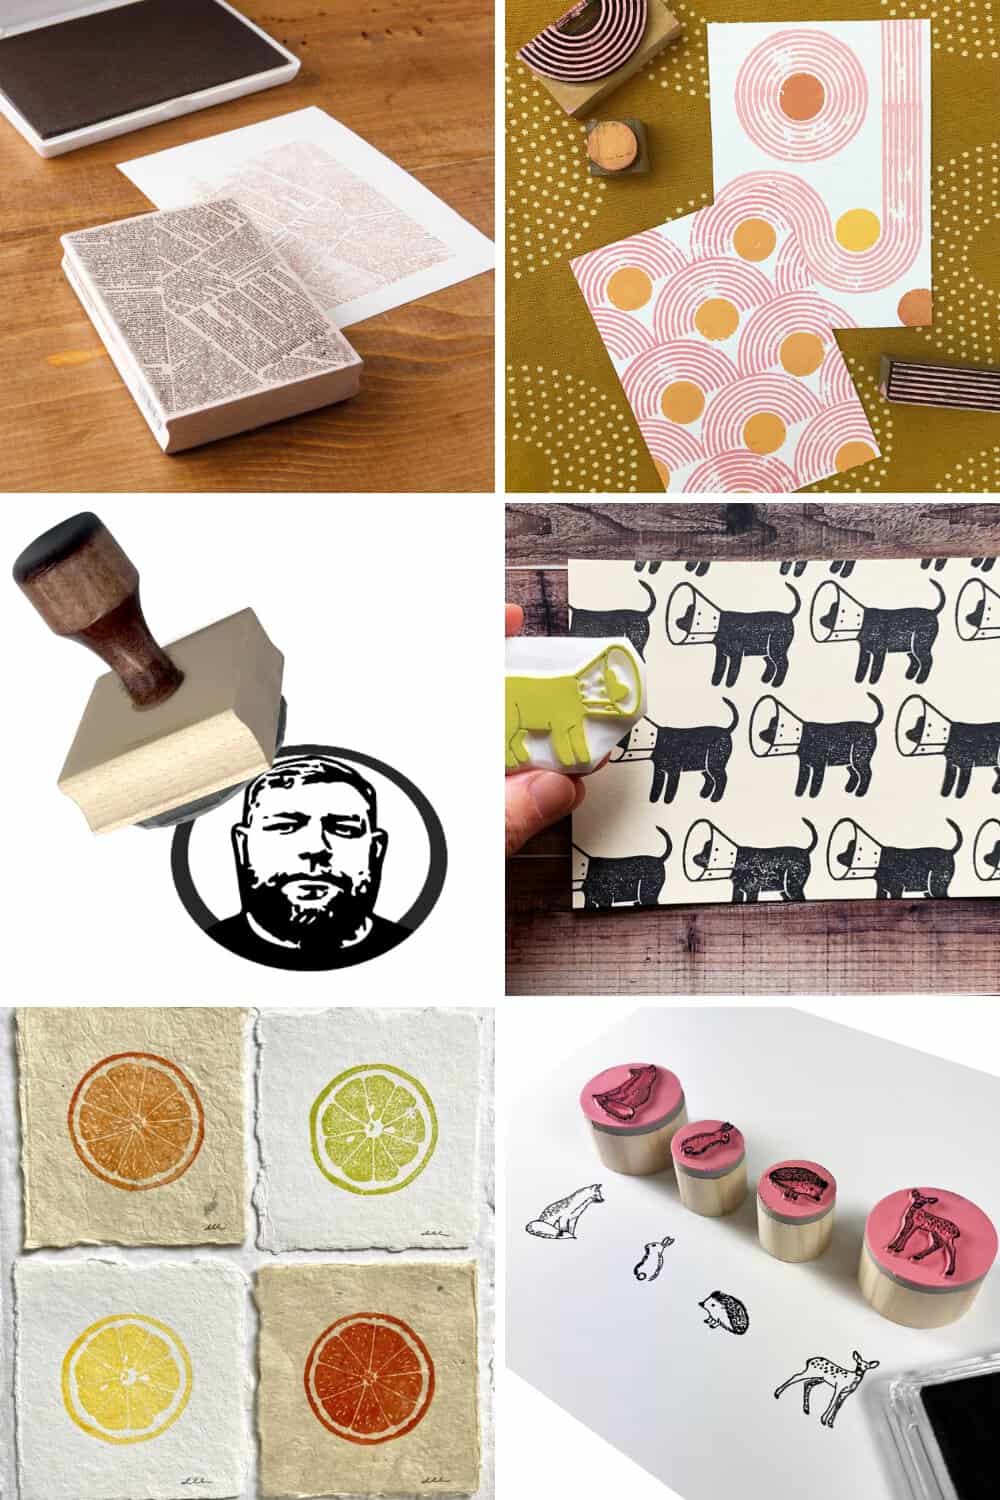 48 Rubber Stamp Designs That Will Make You Dig Out Your Lino Tools